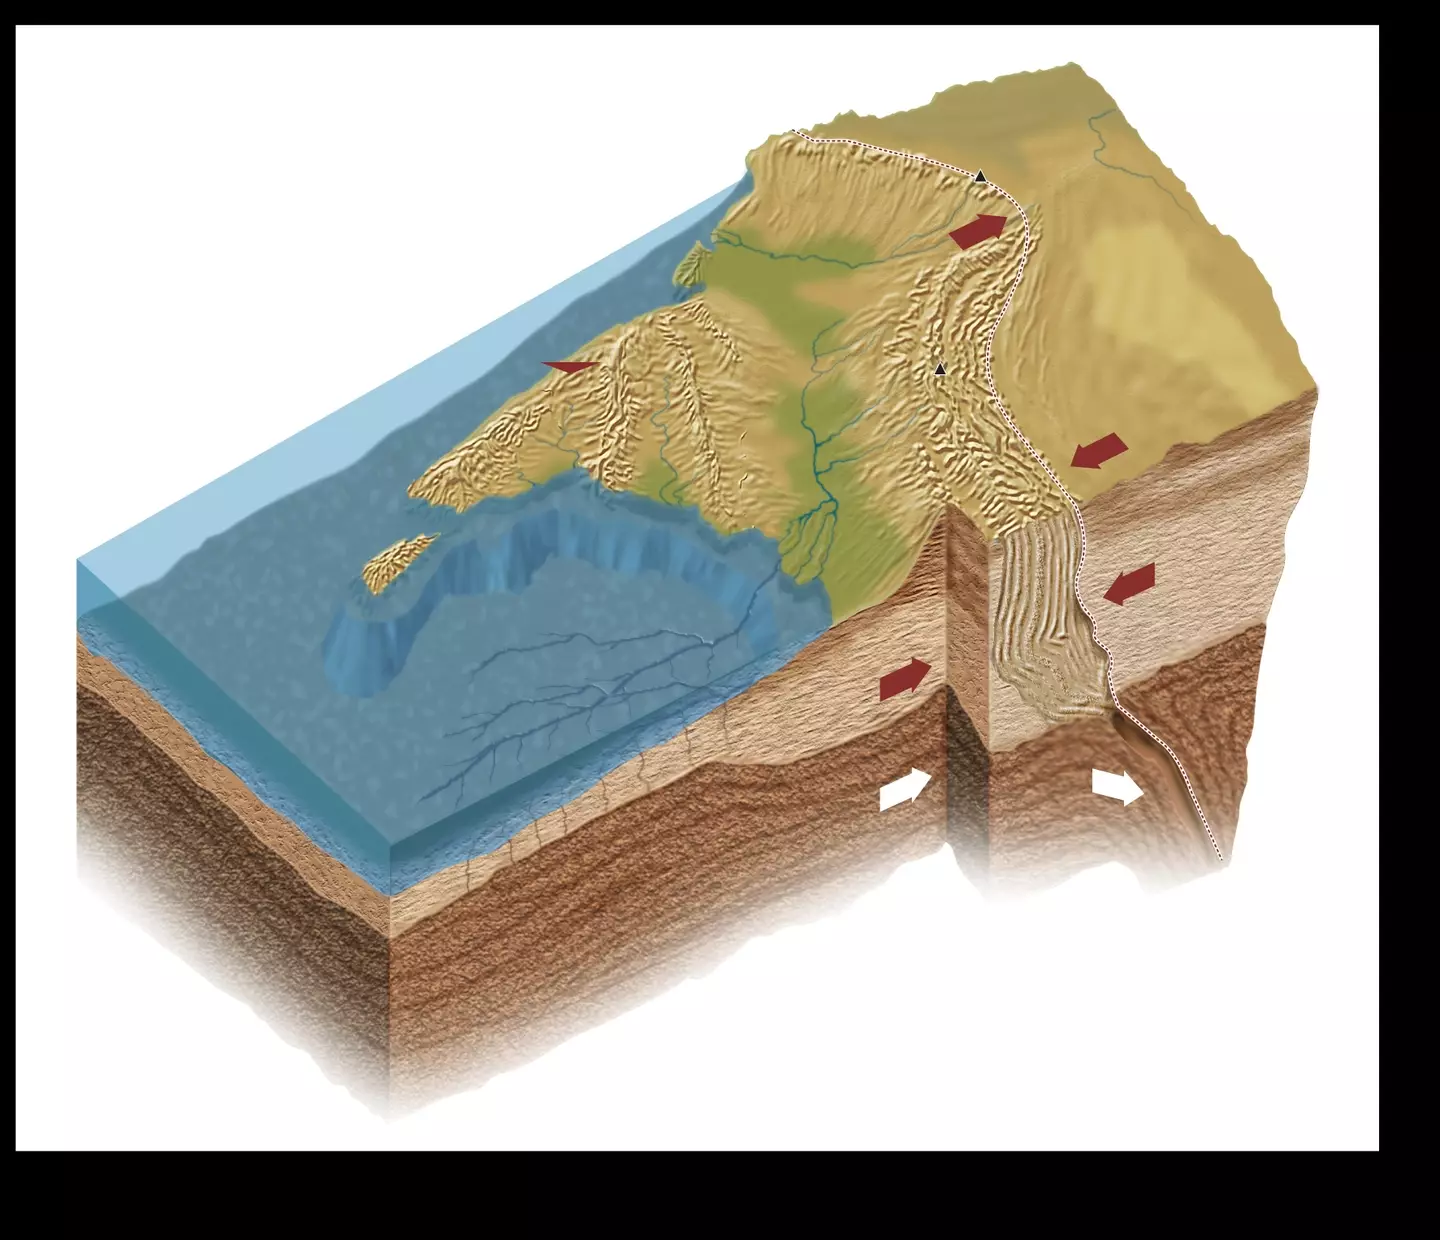 The study focused on the Indian and Eurasian tectonic plates.